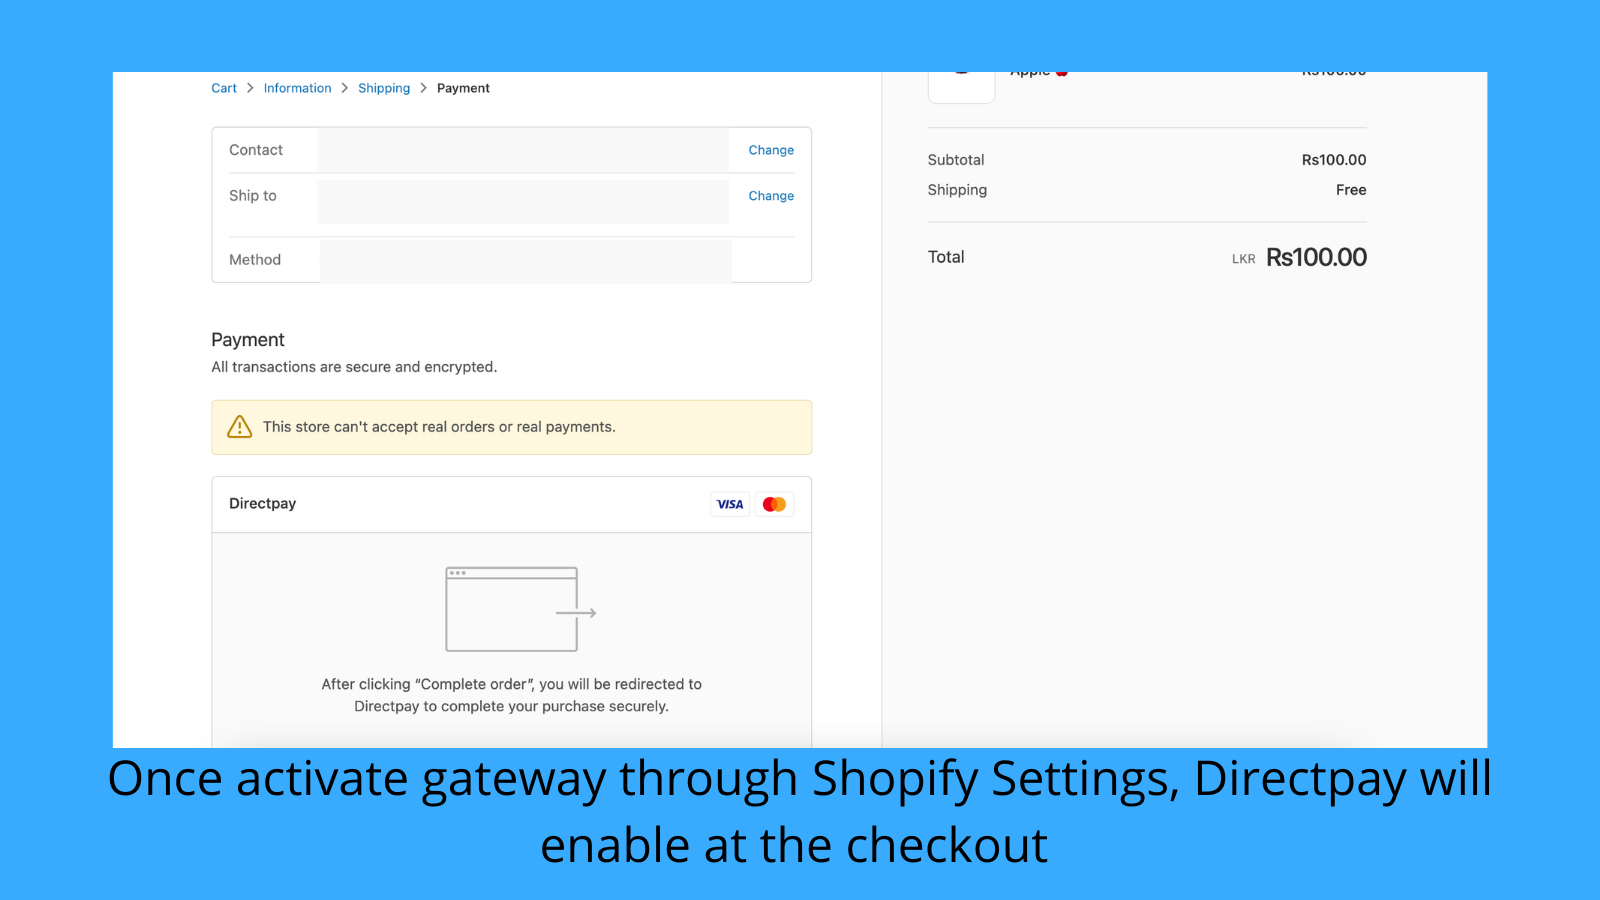 Enable Directpay at the checkout.